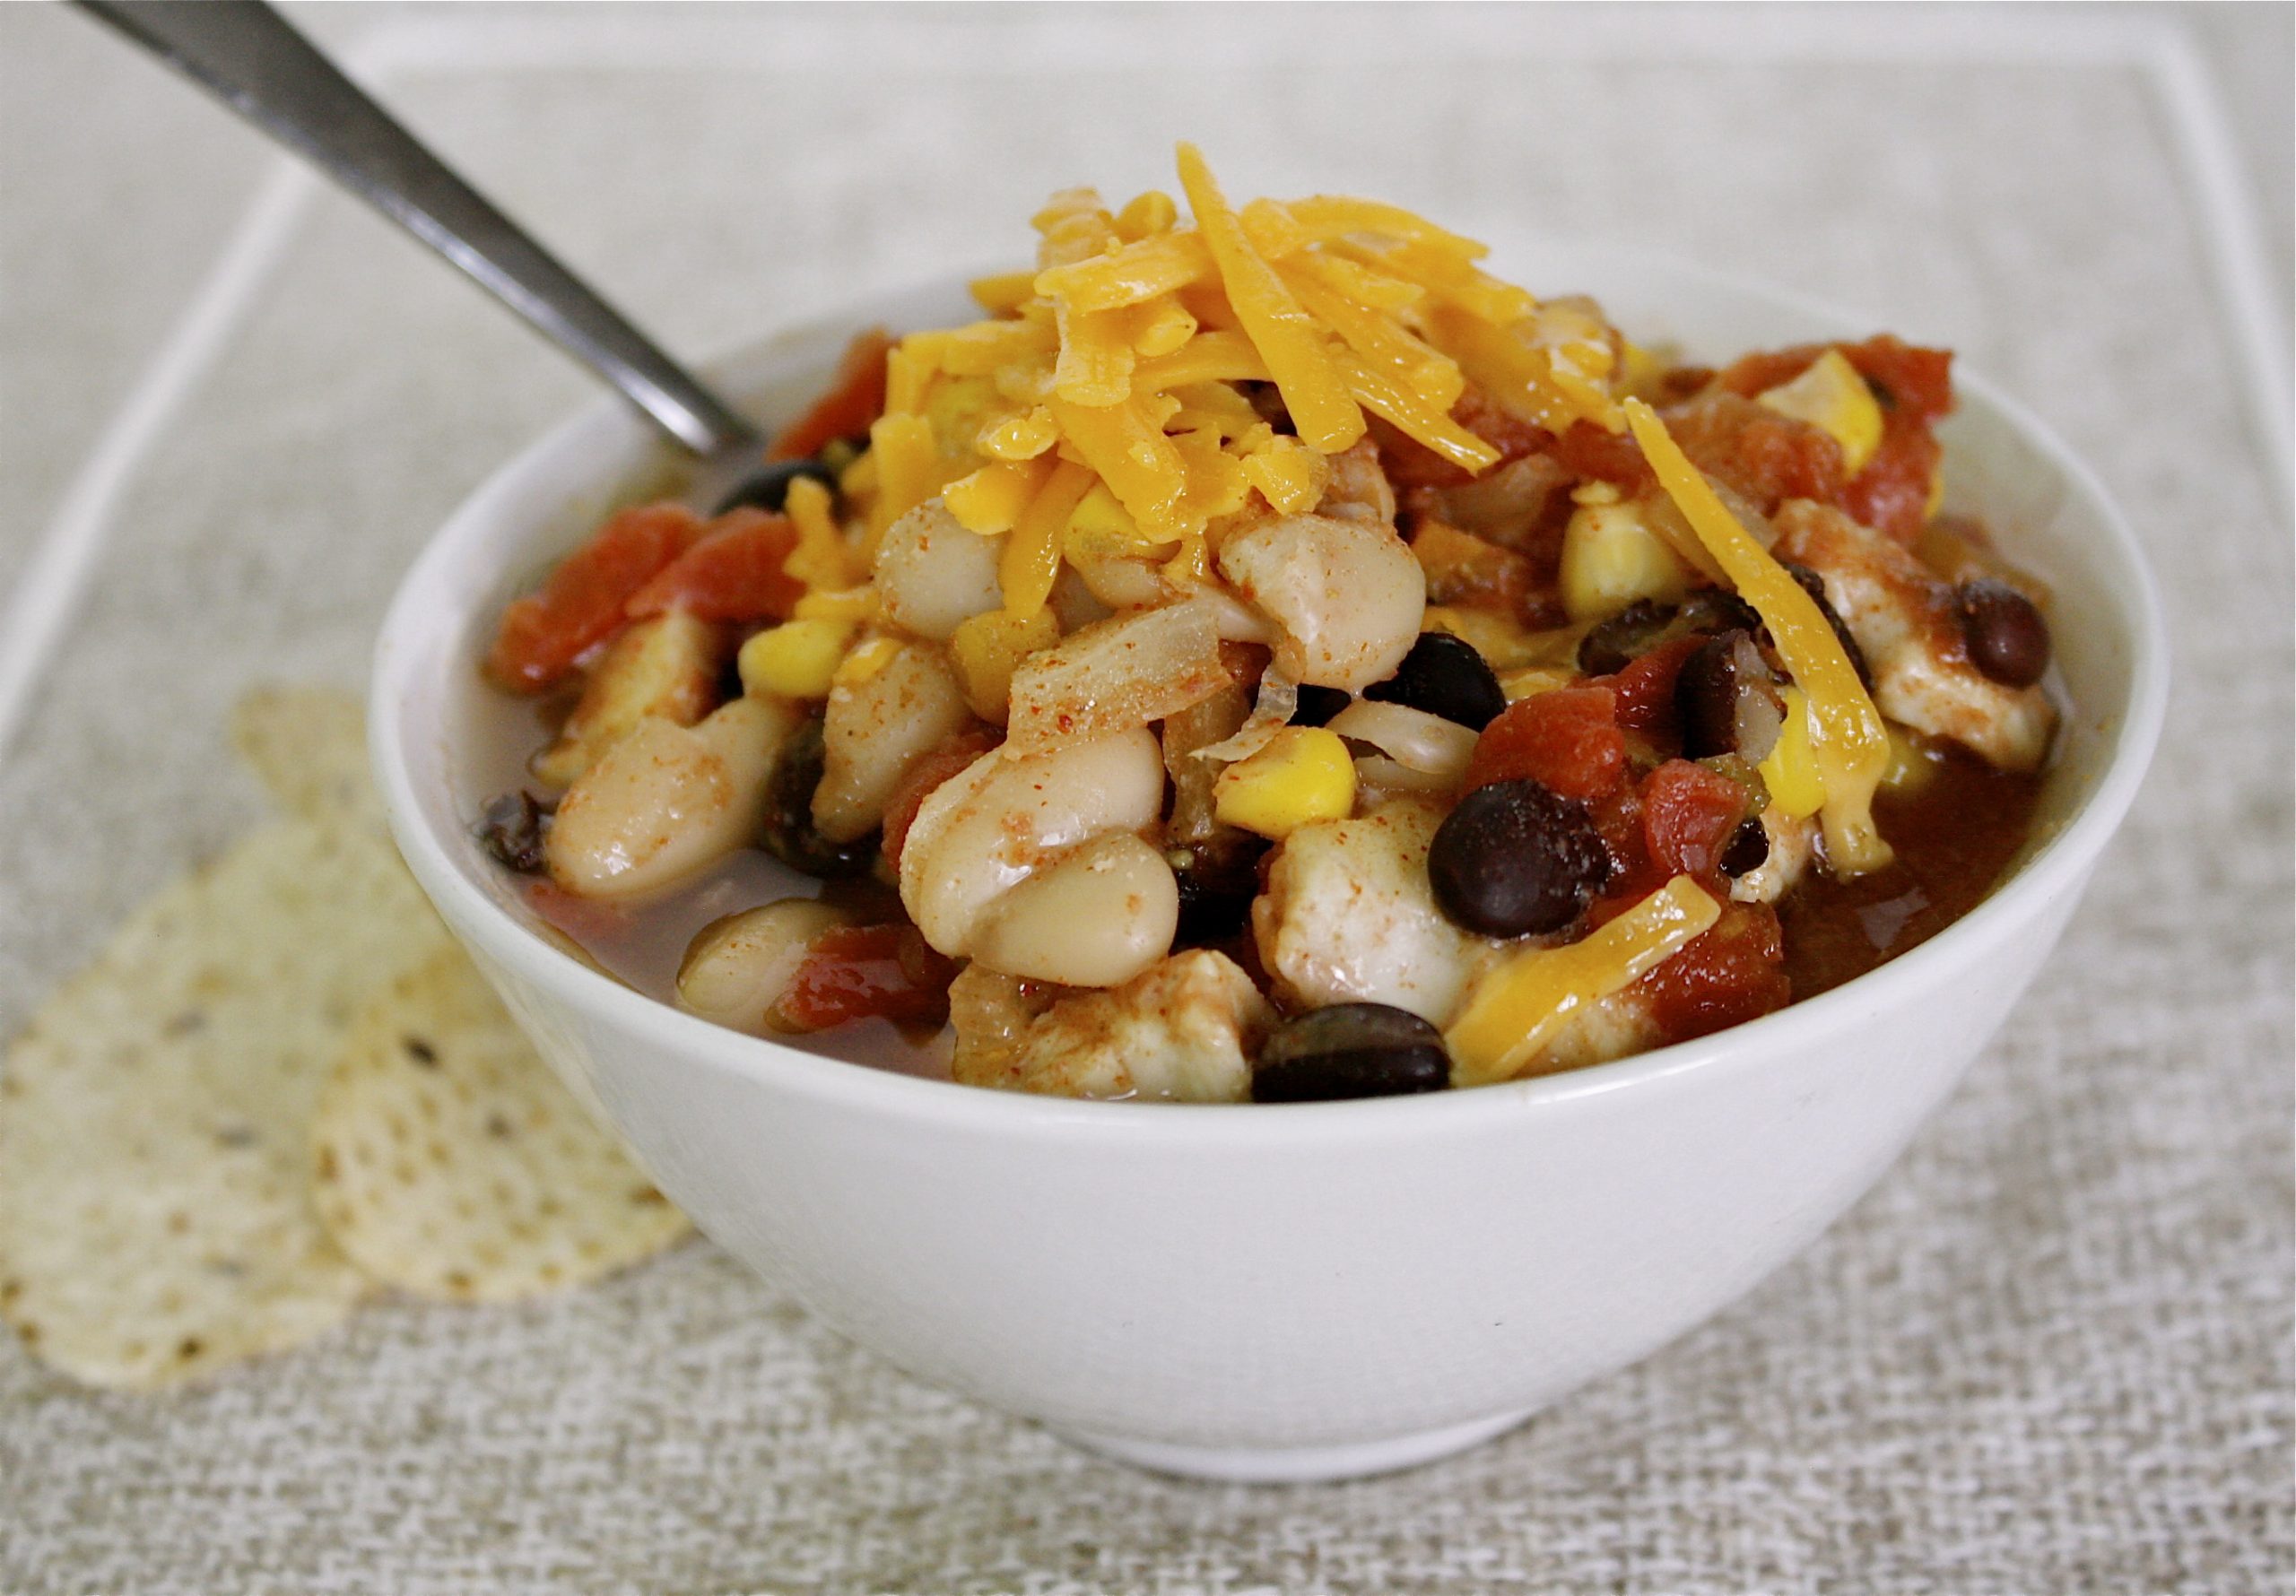 Freezer-to-slow cooker chicken chili from @kellymcnelis